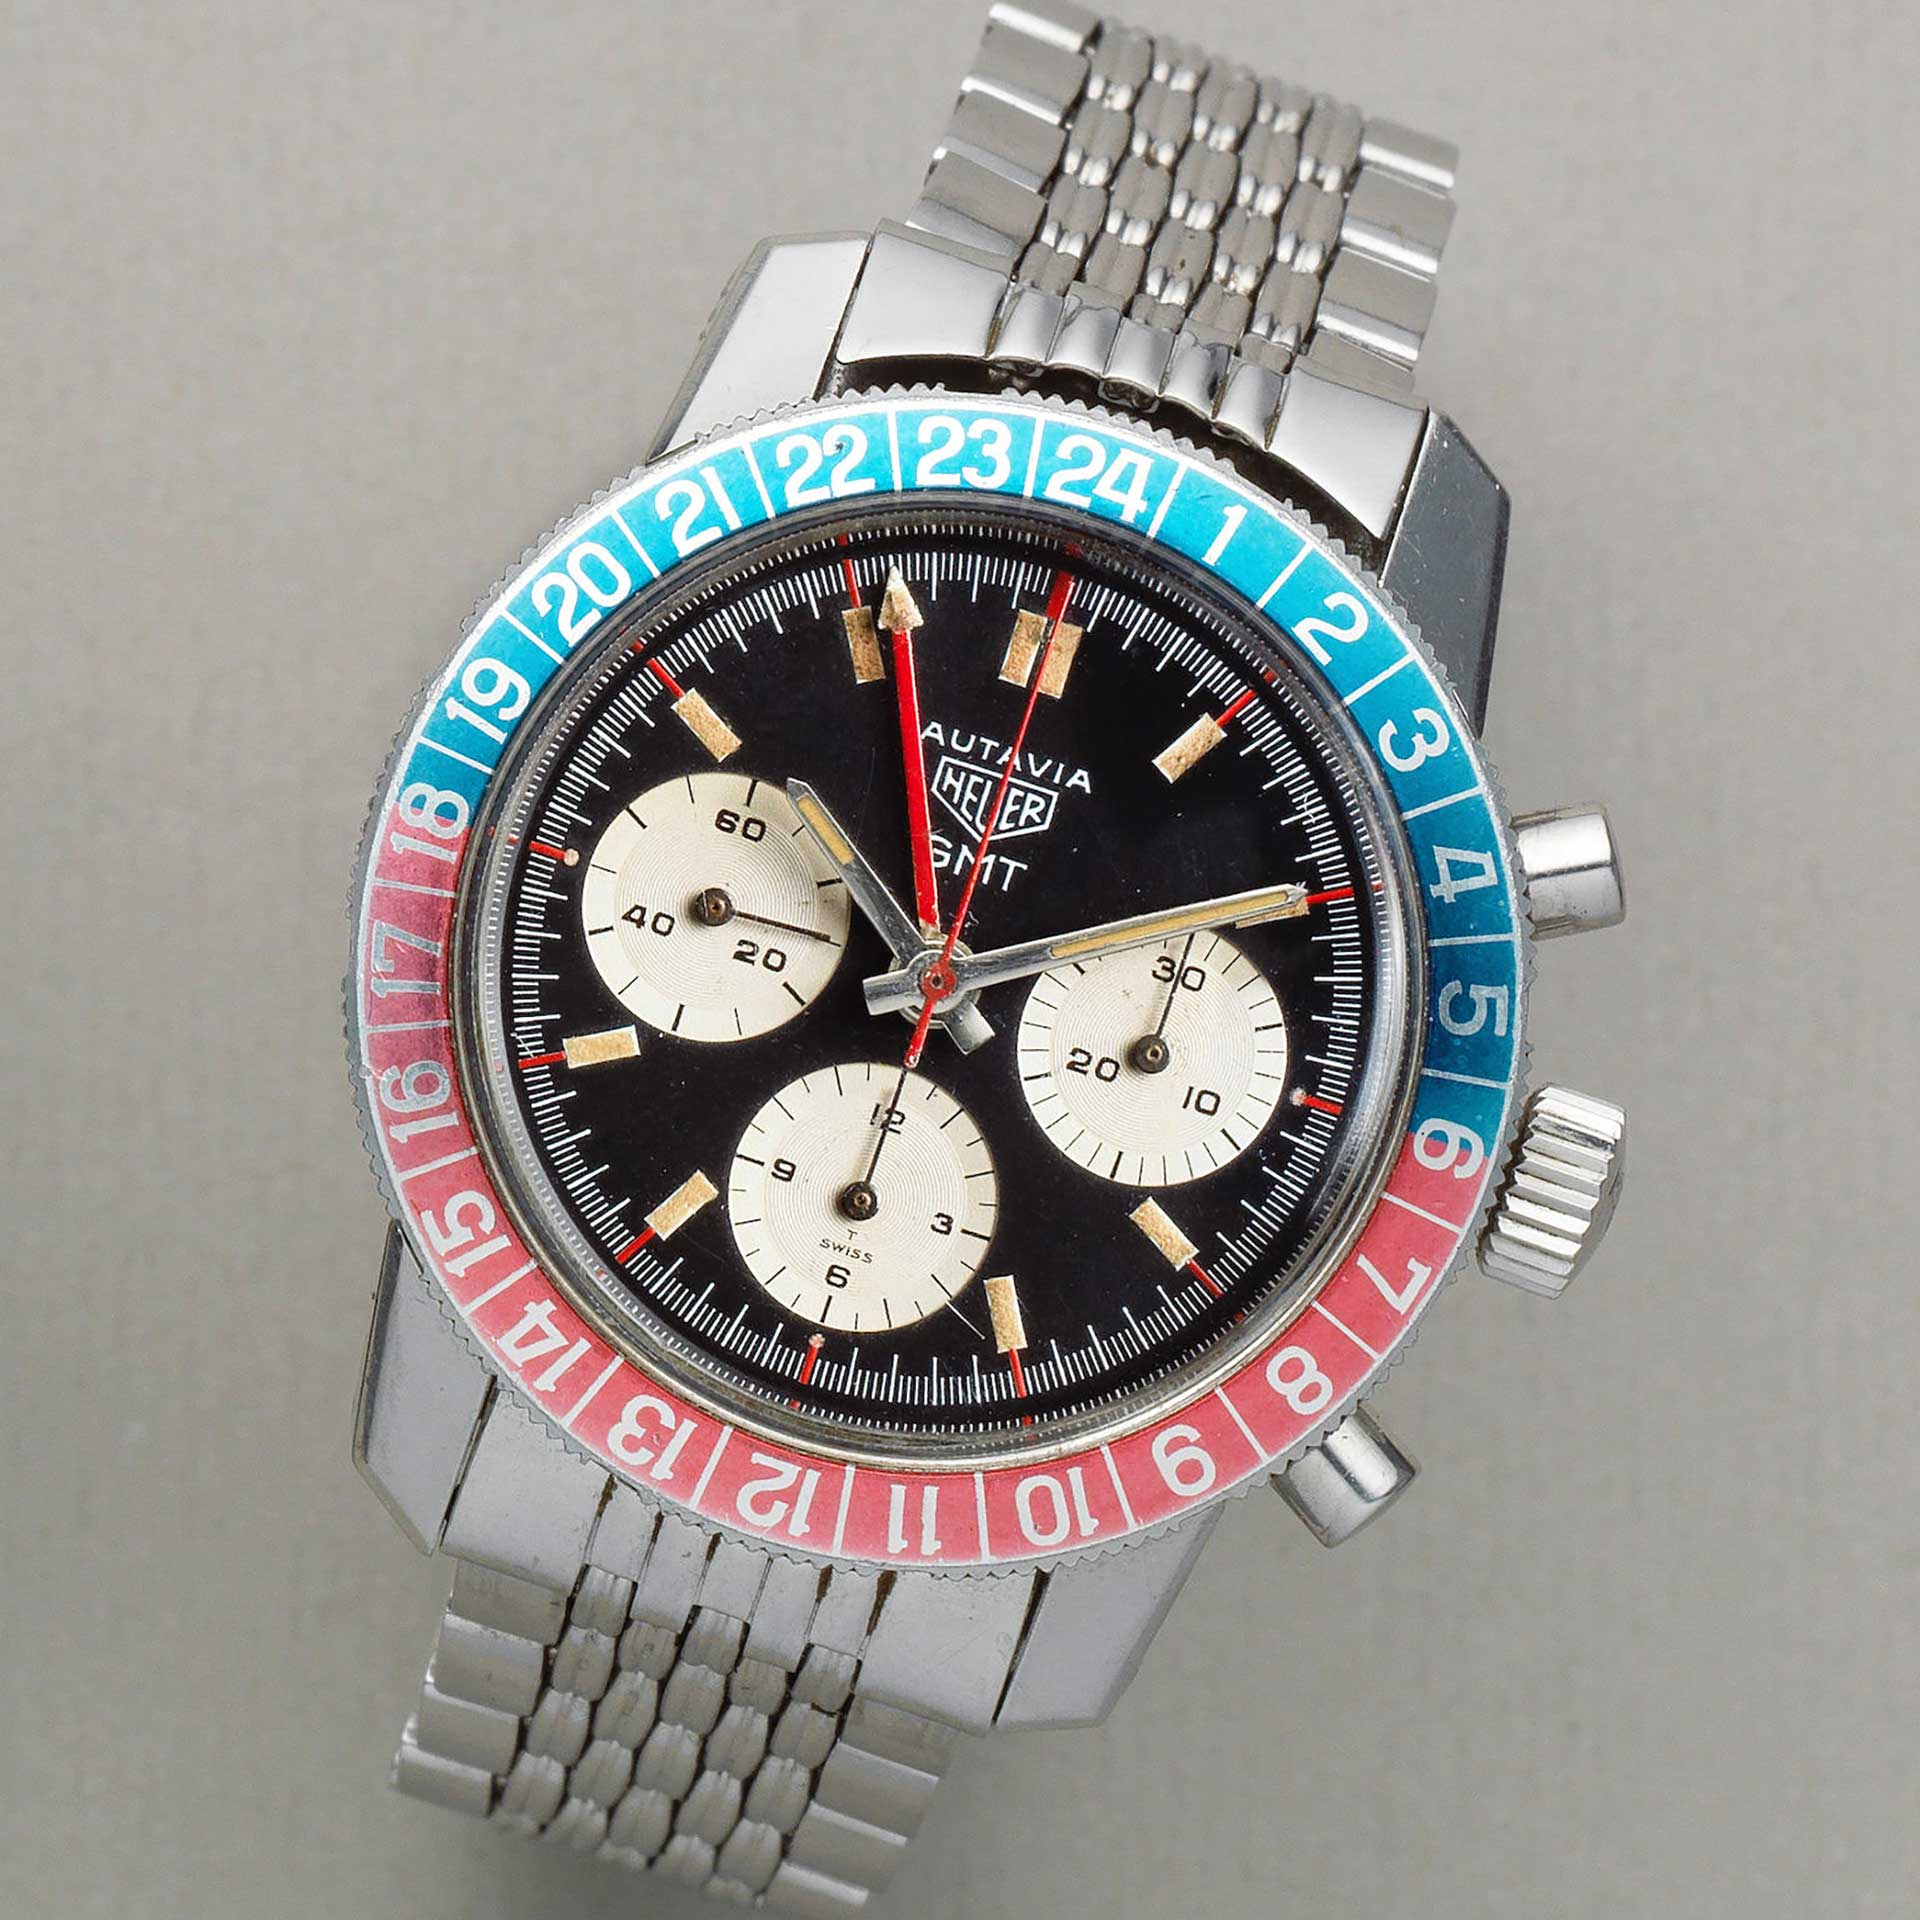 LOT 127 Heuer Stainless Steel Manual Wind Chronograph With Dual Time